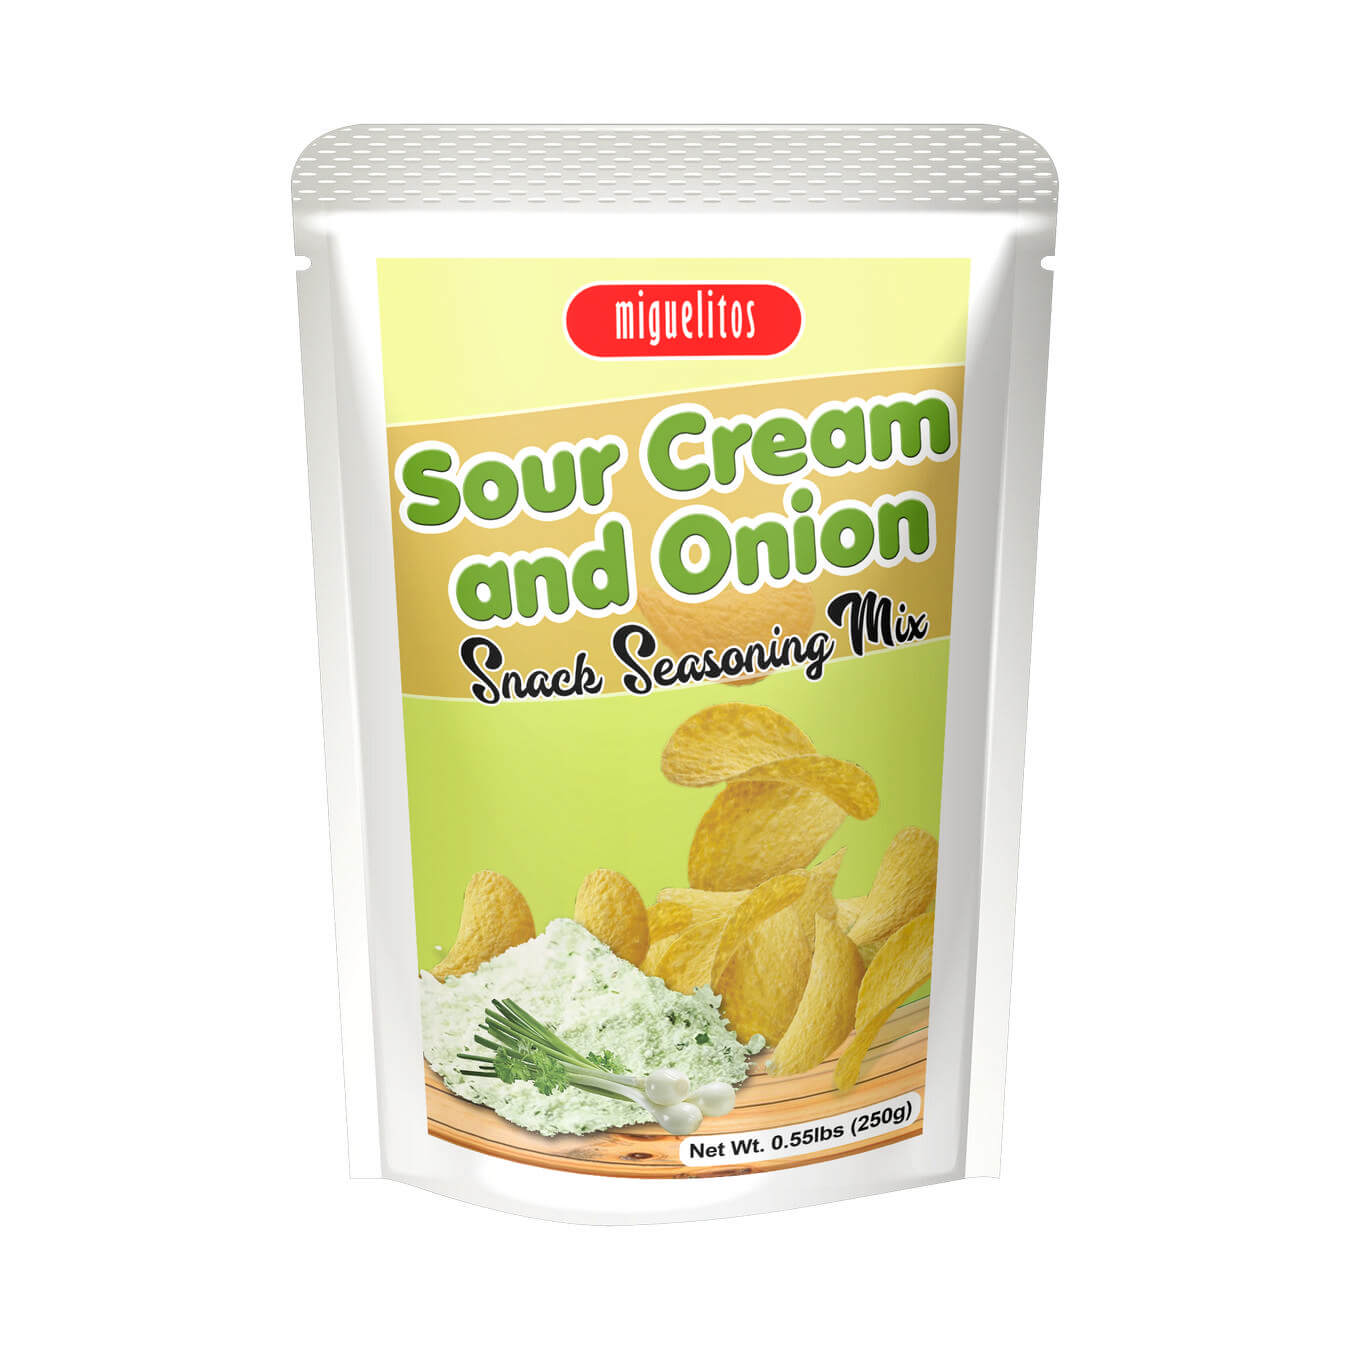 Sour Cream and Onion Snack